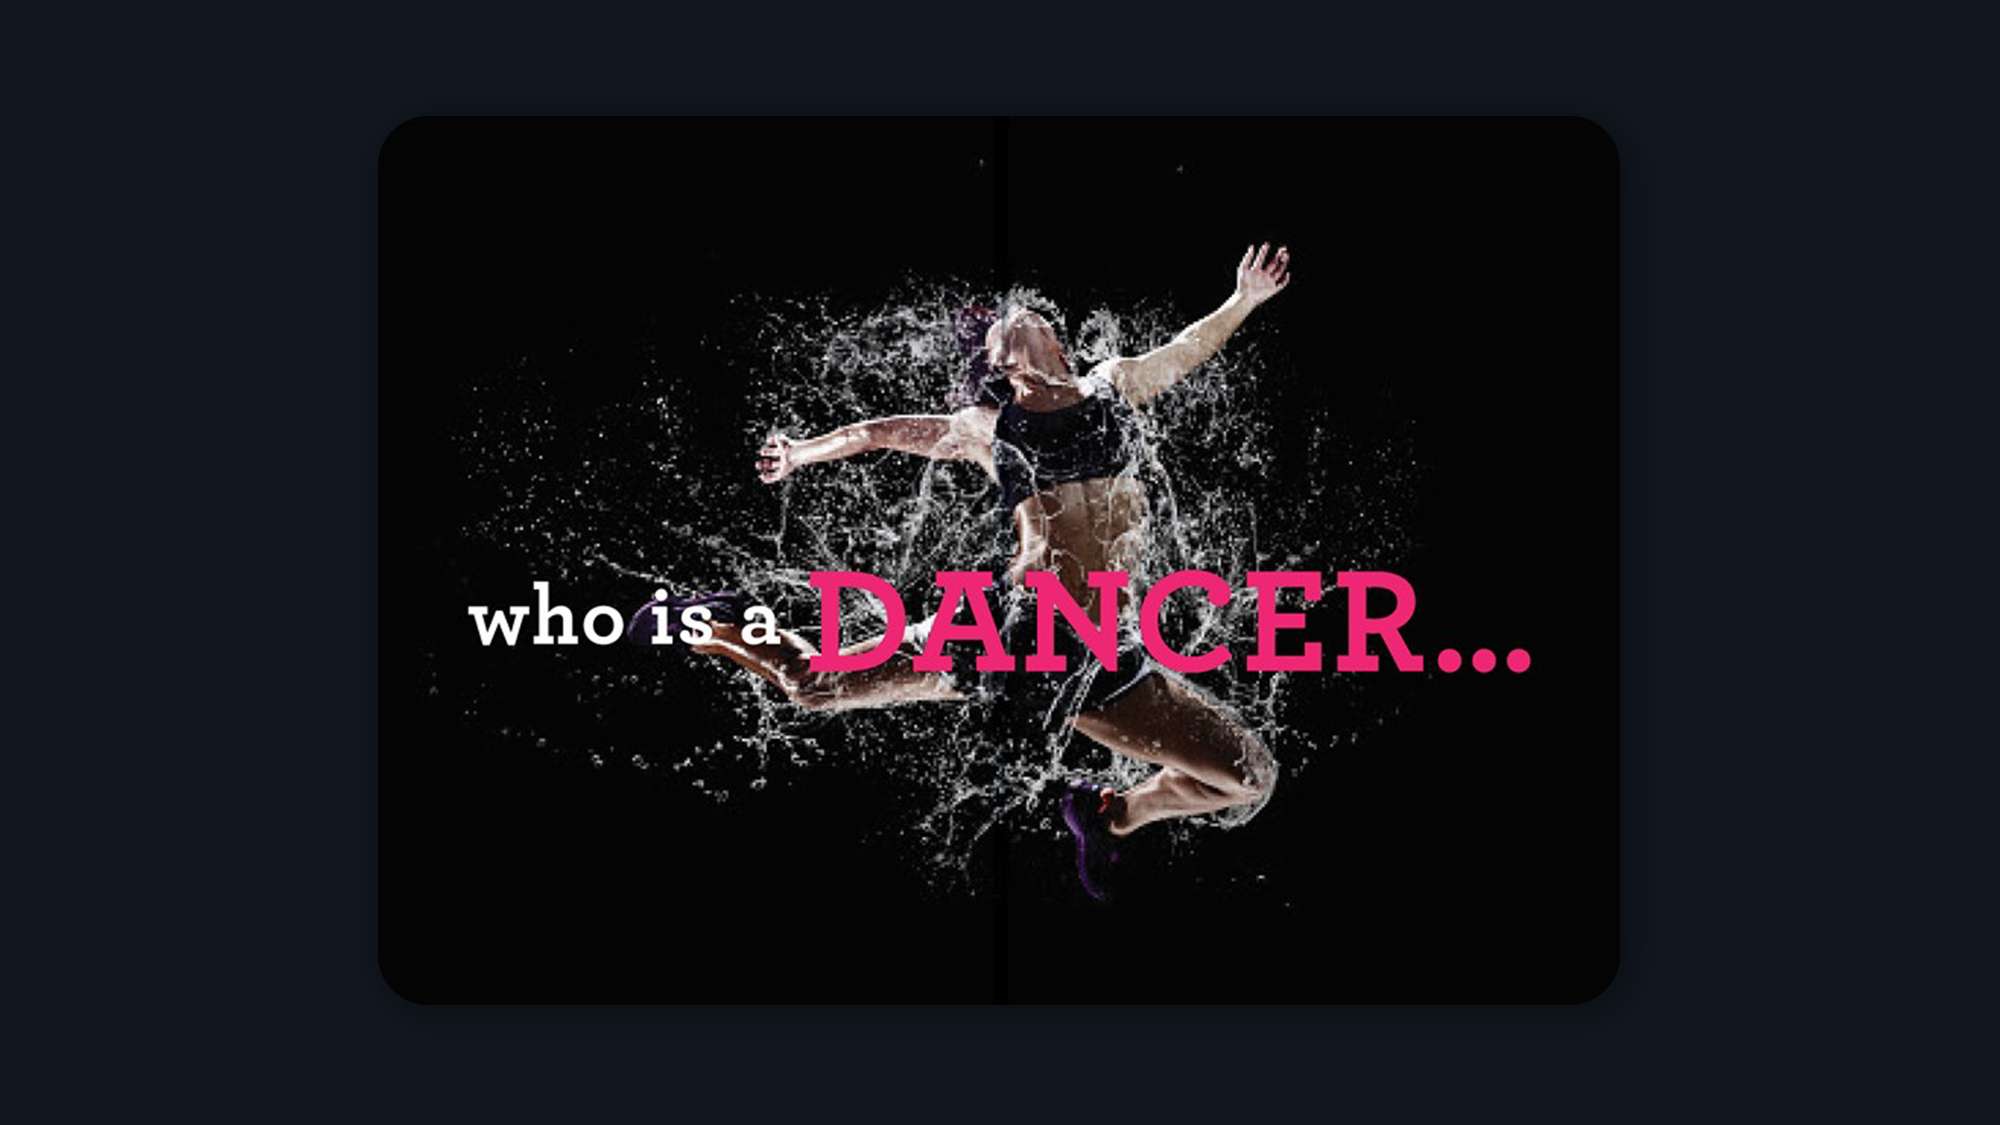 Who is a dancer. Text of photo dramatic photo of a woman in water in a dance pose.